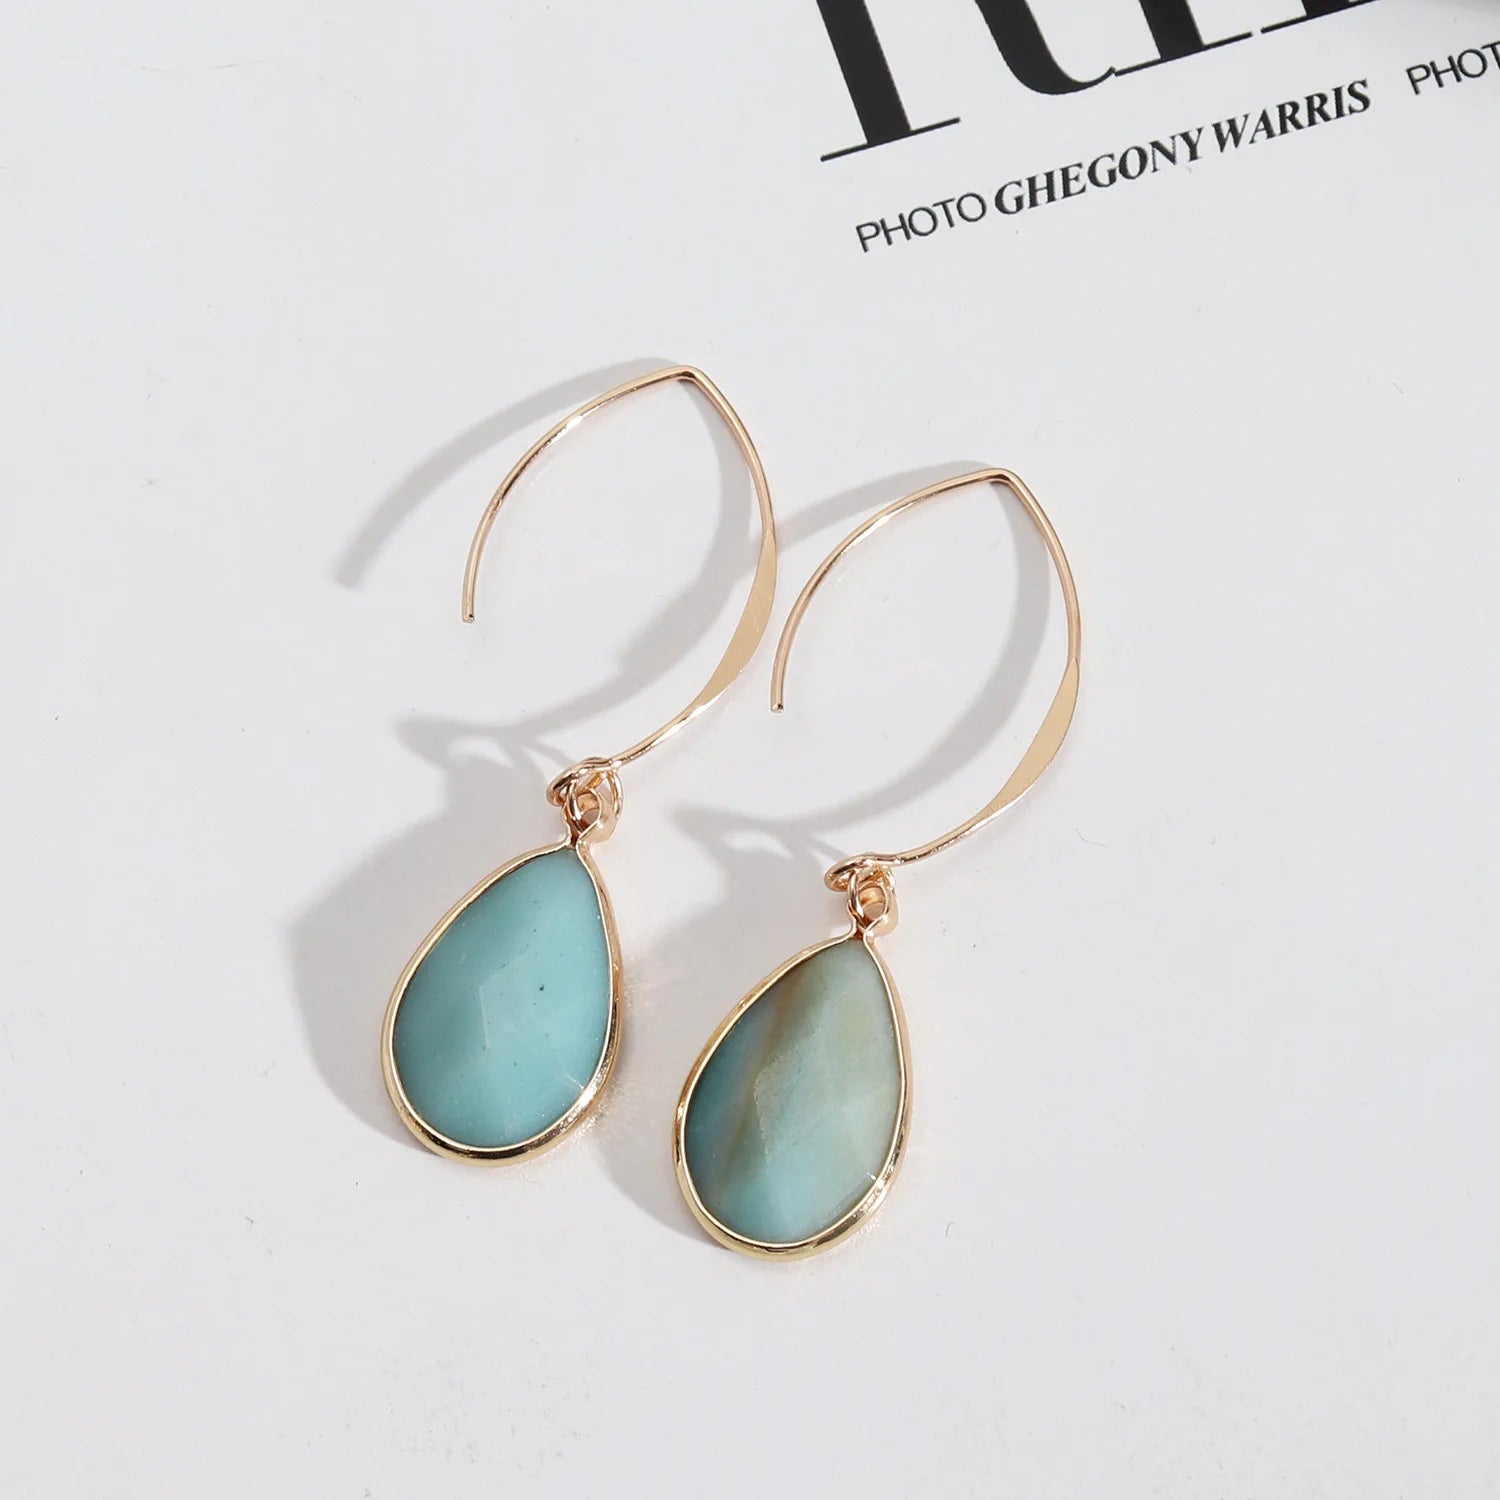 Amazonite "Tianhe" Earrings for Communication and Confidence